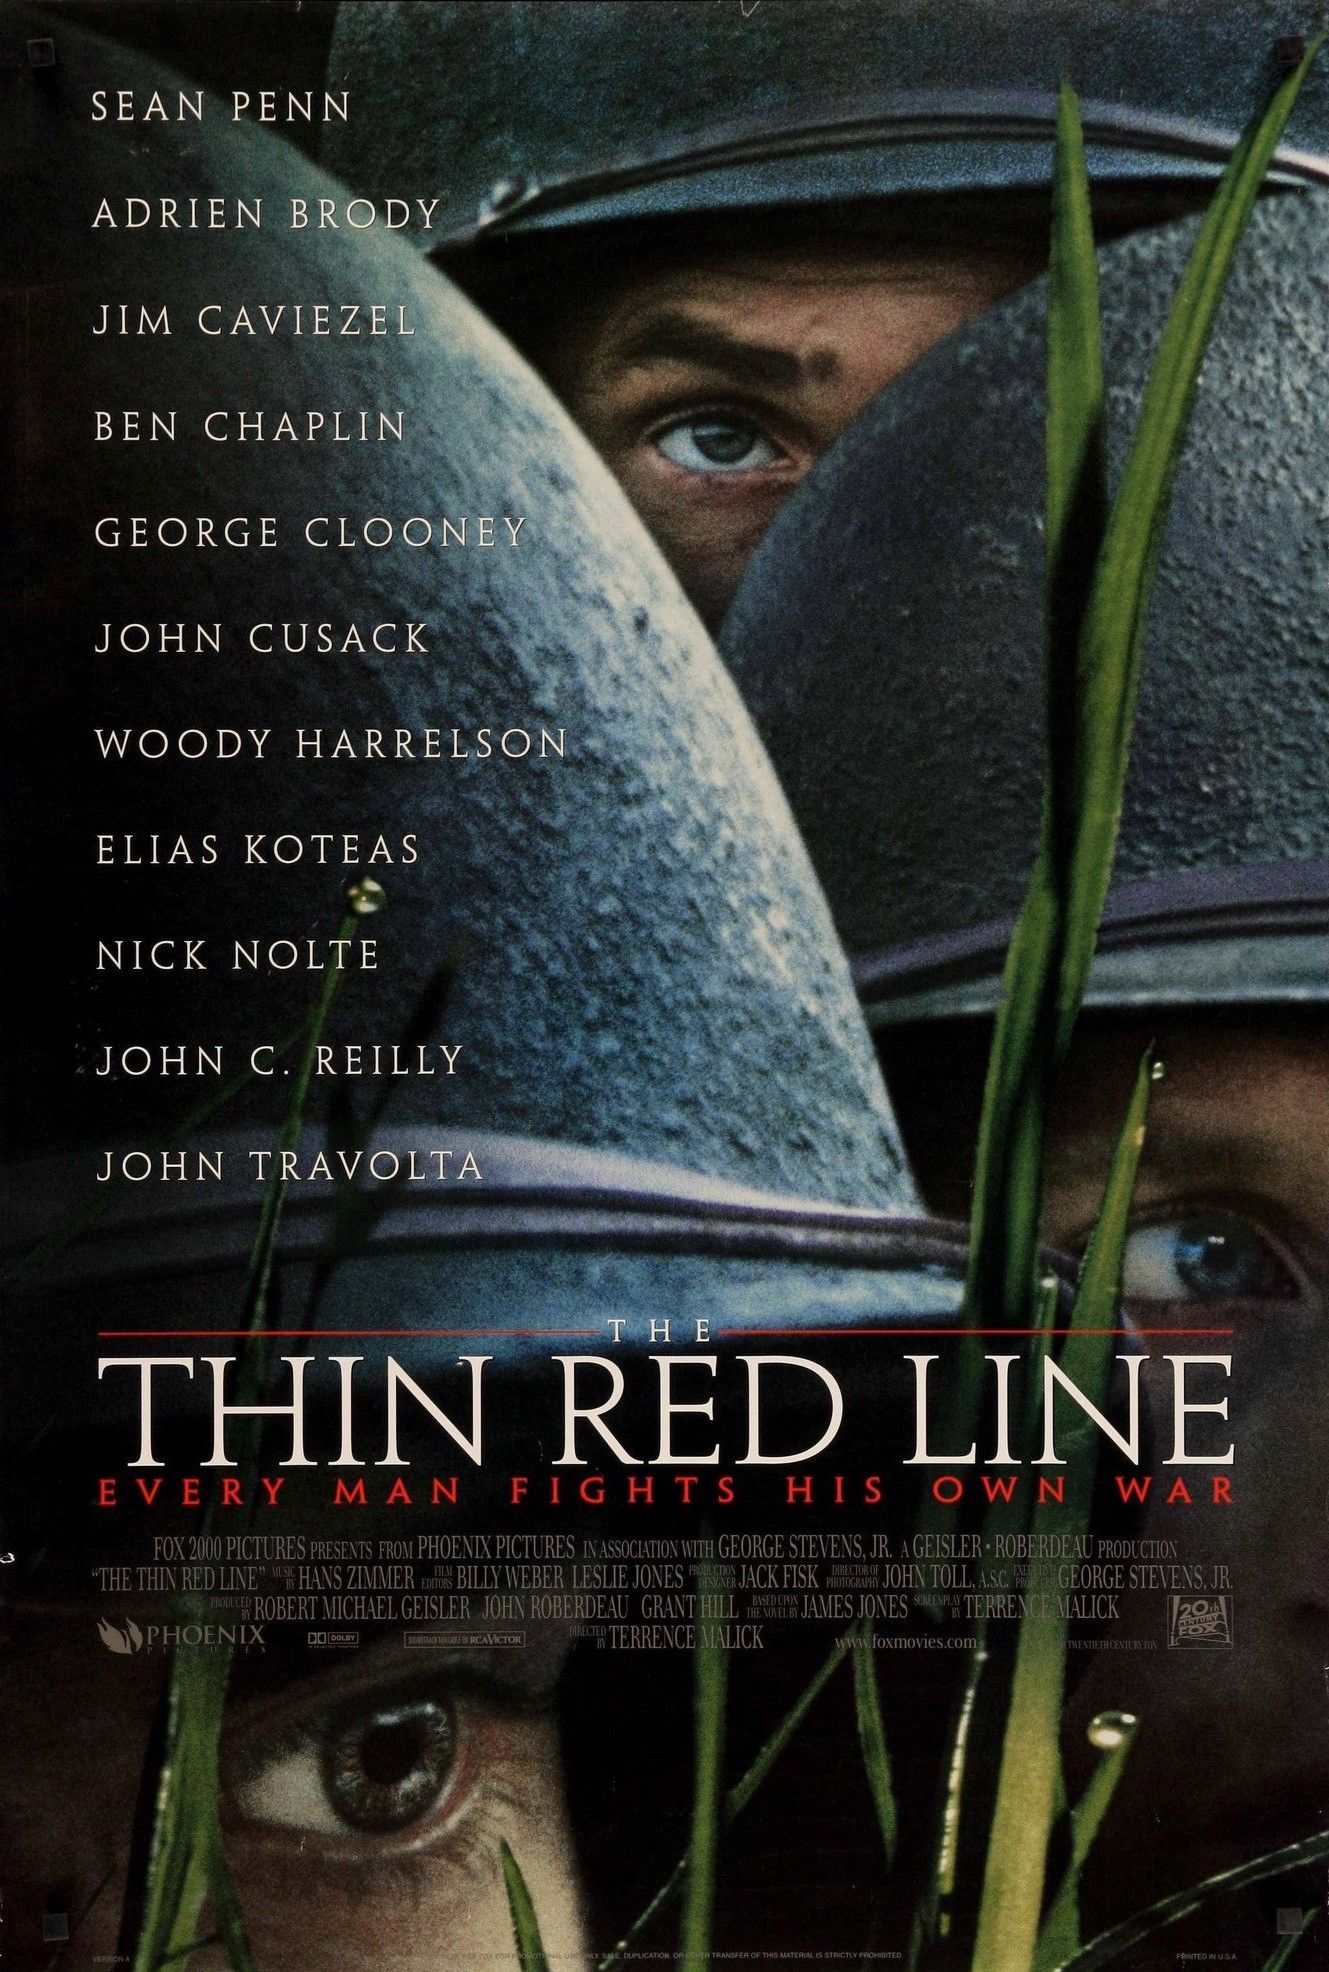 The Thin Red Line Film Poster